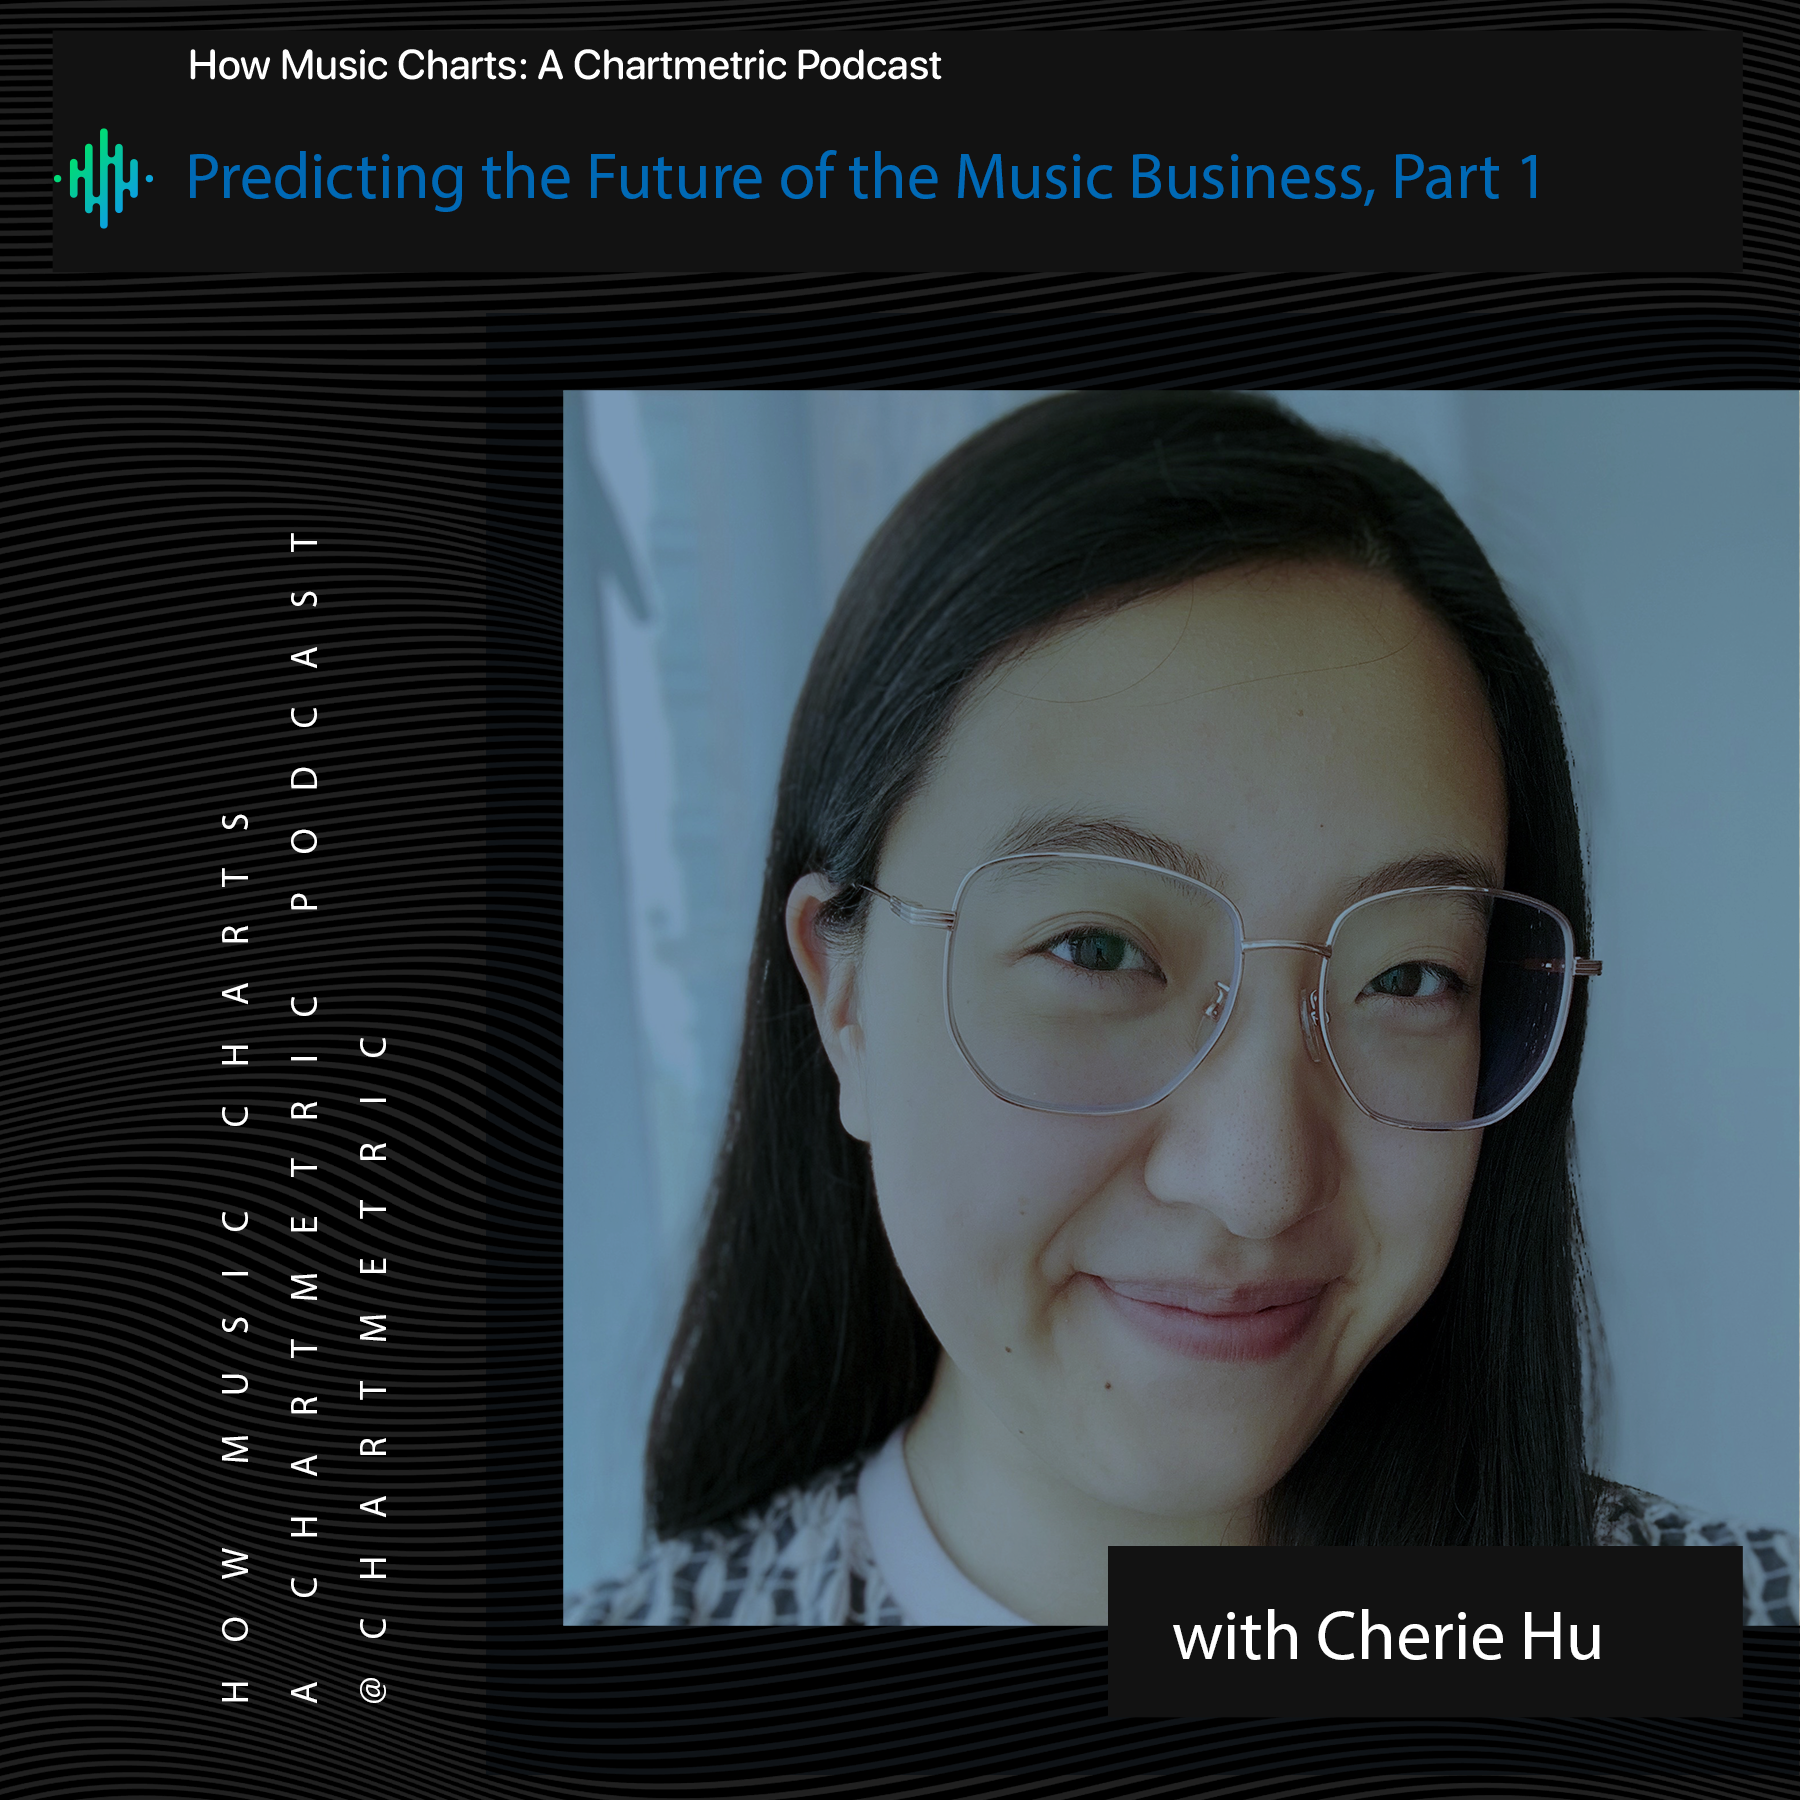 Predicting the Future of the Music Business With Cherie Hu, Part 1